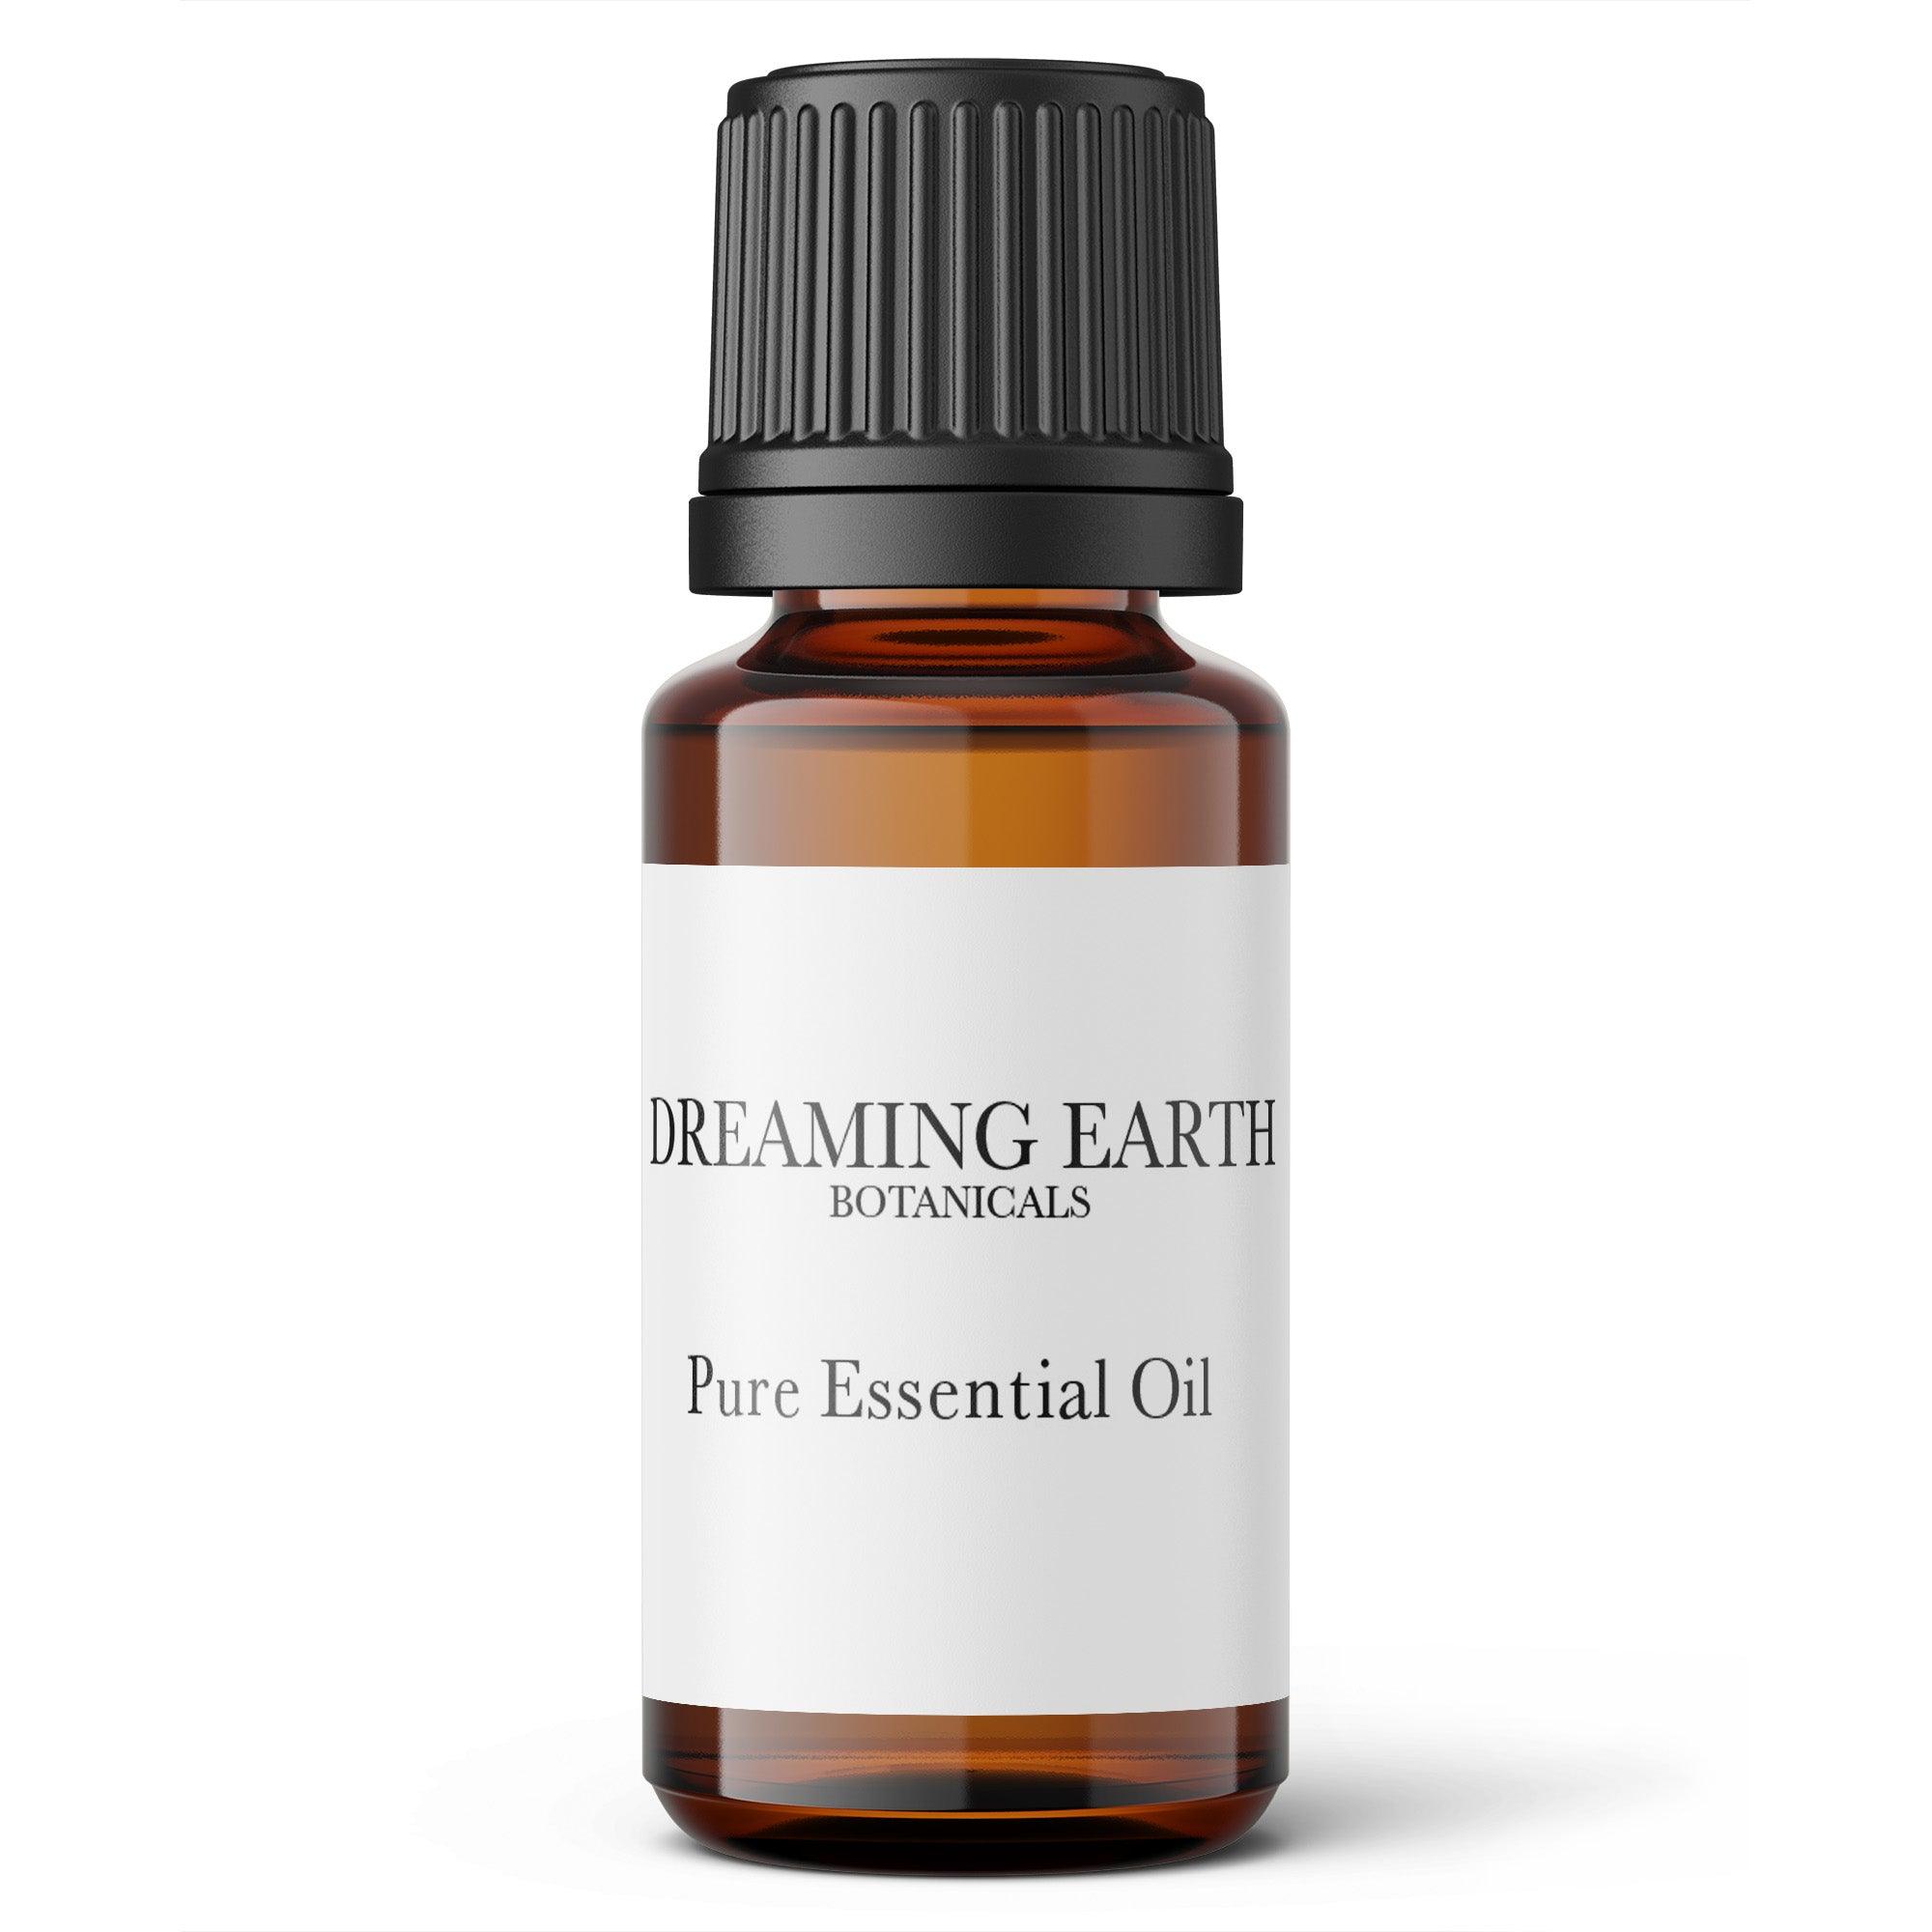 Load image into Gallery viewer, Chamomile, Blue (German) Essential Oil - Dreaming Earth Inc
